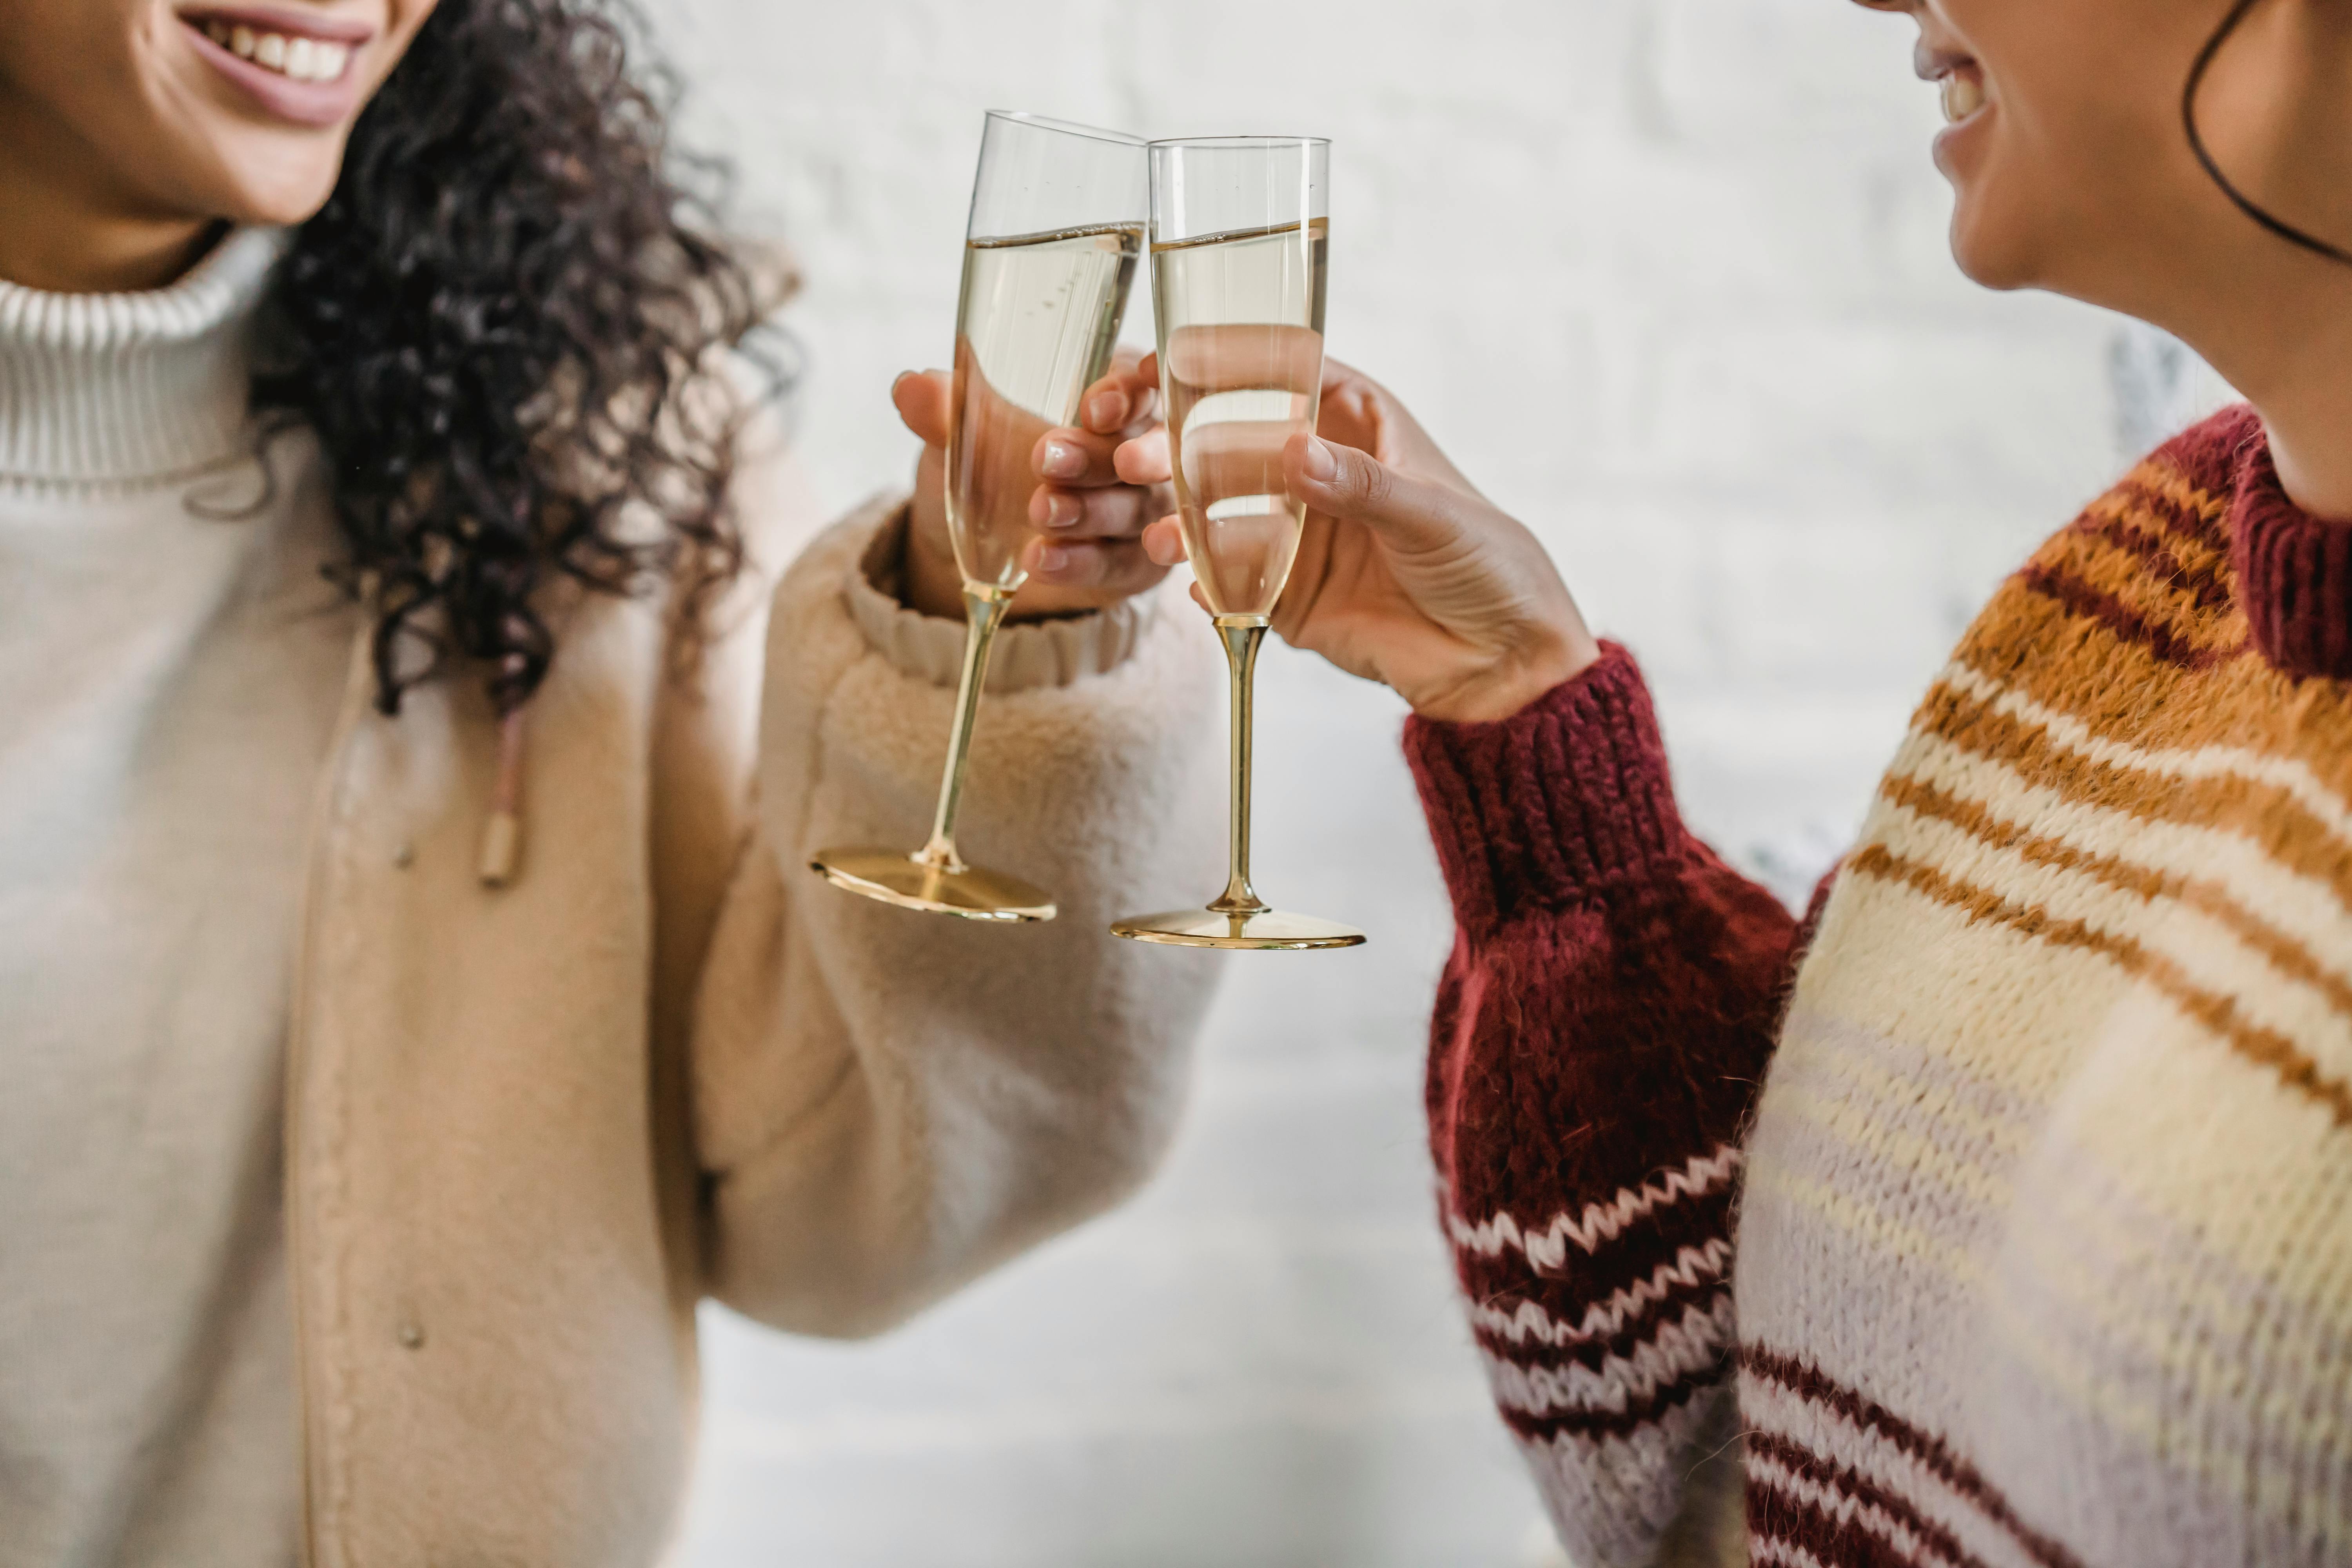 Two friends celebrating with a toast | Source: Pexels